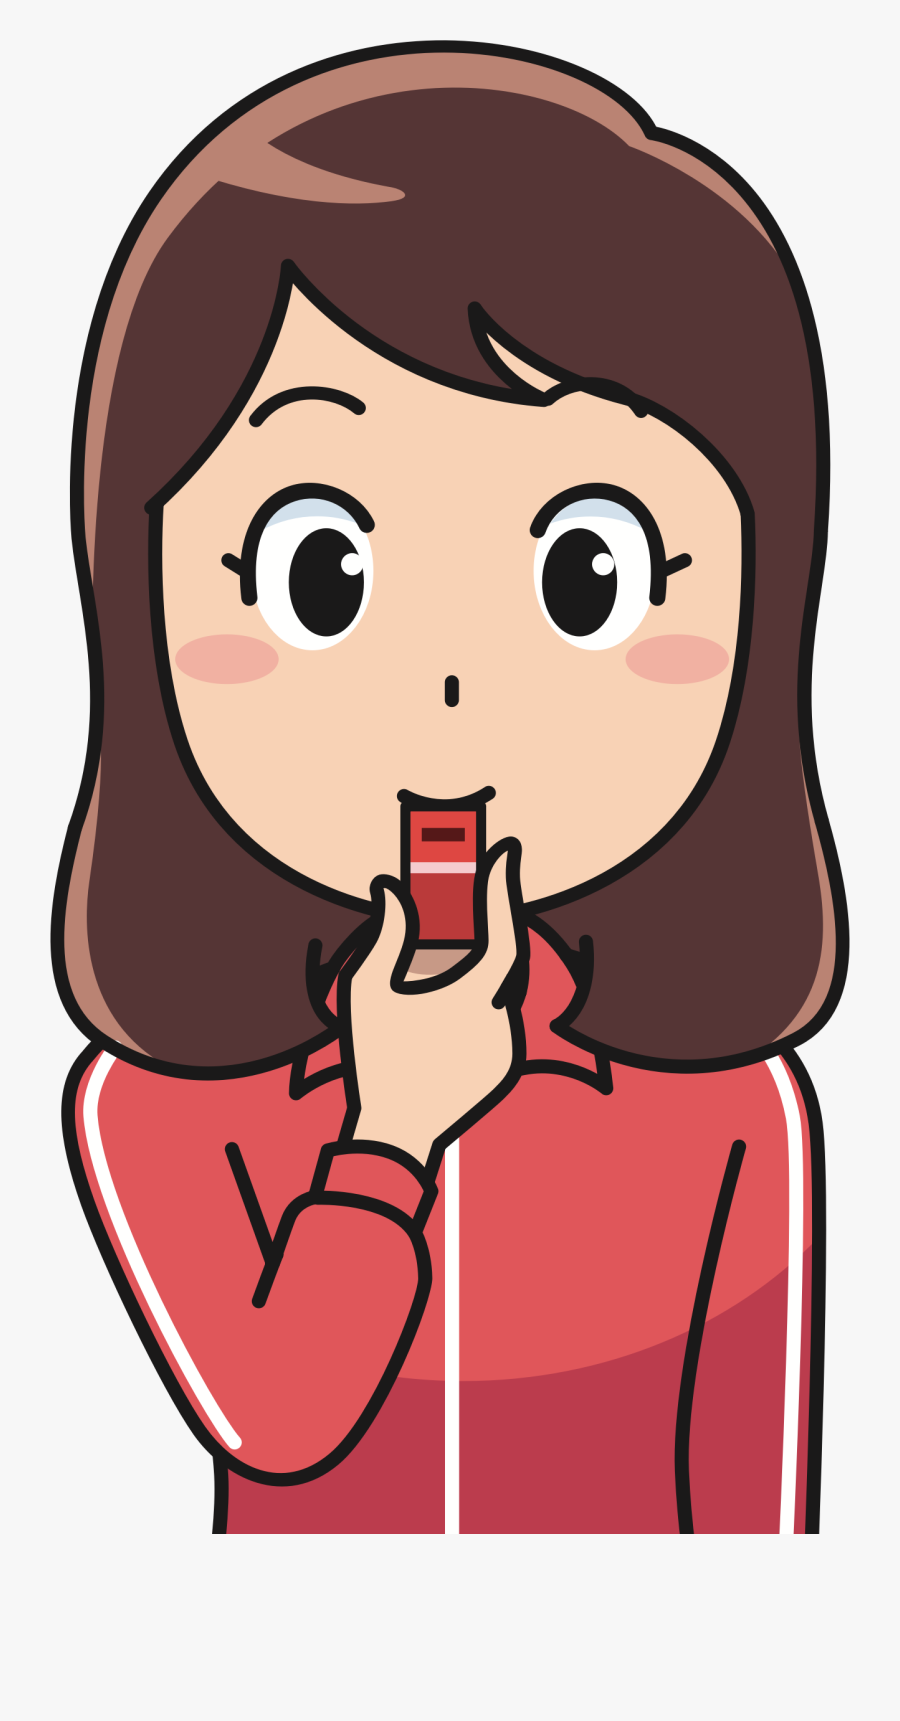 Whistleblower - Girl With Whistle Clipart, Transparent Clipart